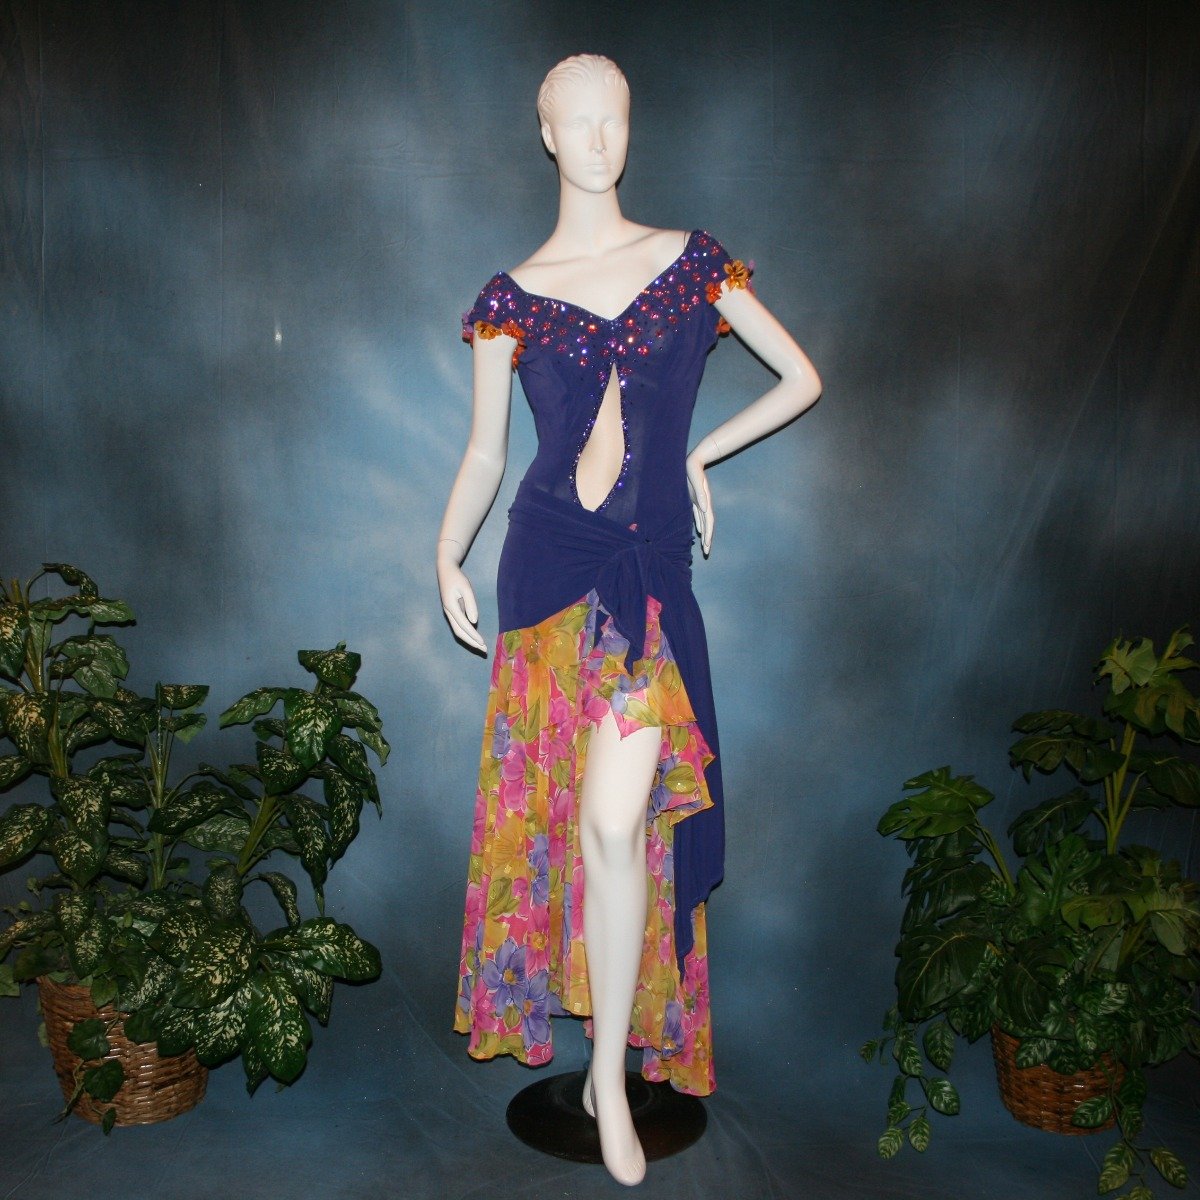 Crystal's Creations Converta ballroom dress featuring a Latin dress created in luxurious deep perwinkle solid slinky with lots of flounces in accents of a floral chiffon in yellow with pinks & purples